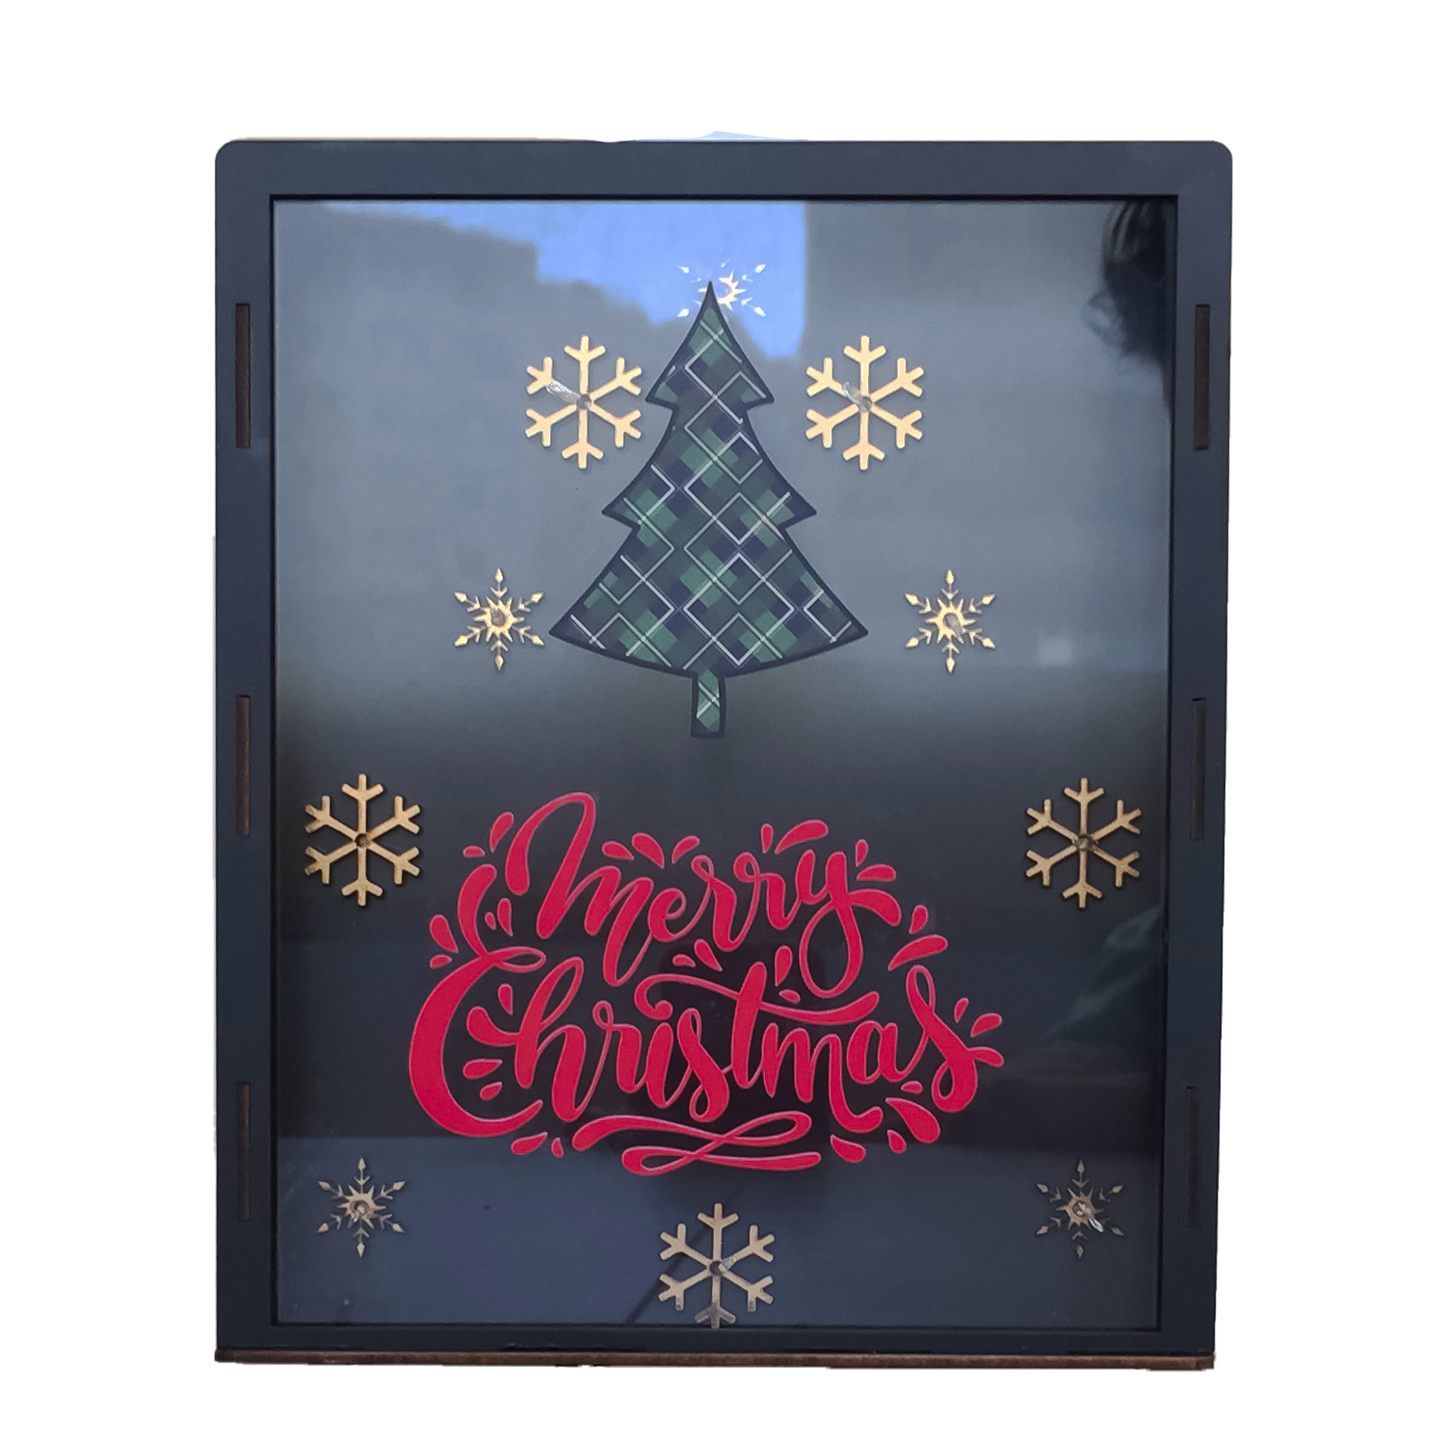 Merry Christmas wooden Stand